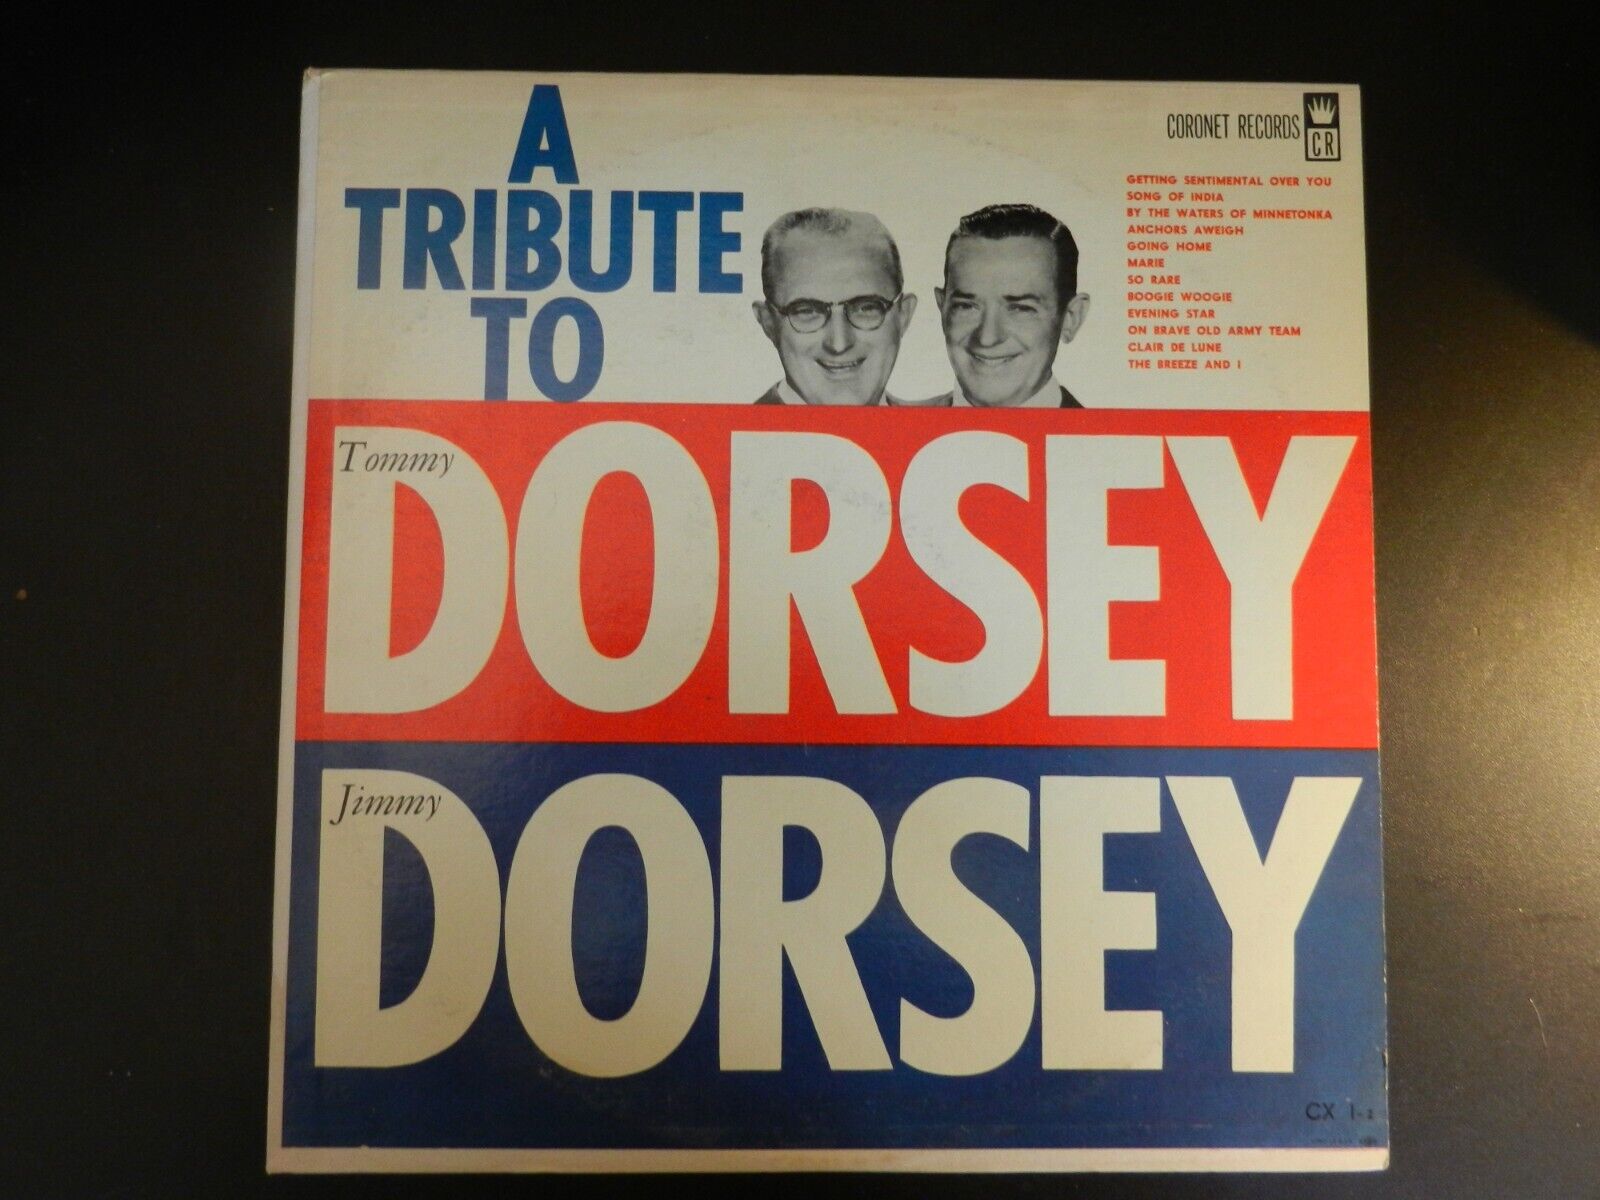 Vintage *A TRIBUTE TO TOMMY AND JIMMY DORSEY* by Coronet Records (Record -vinyl)